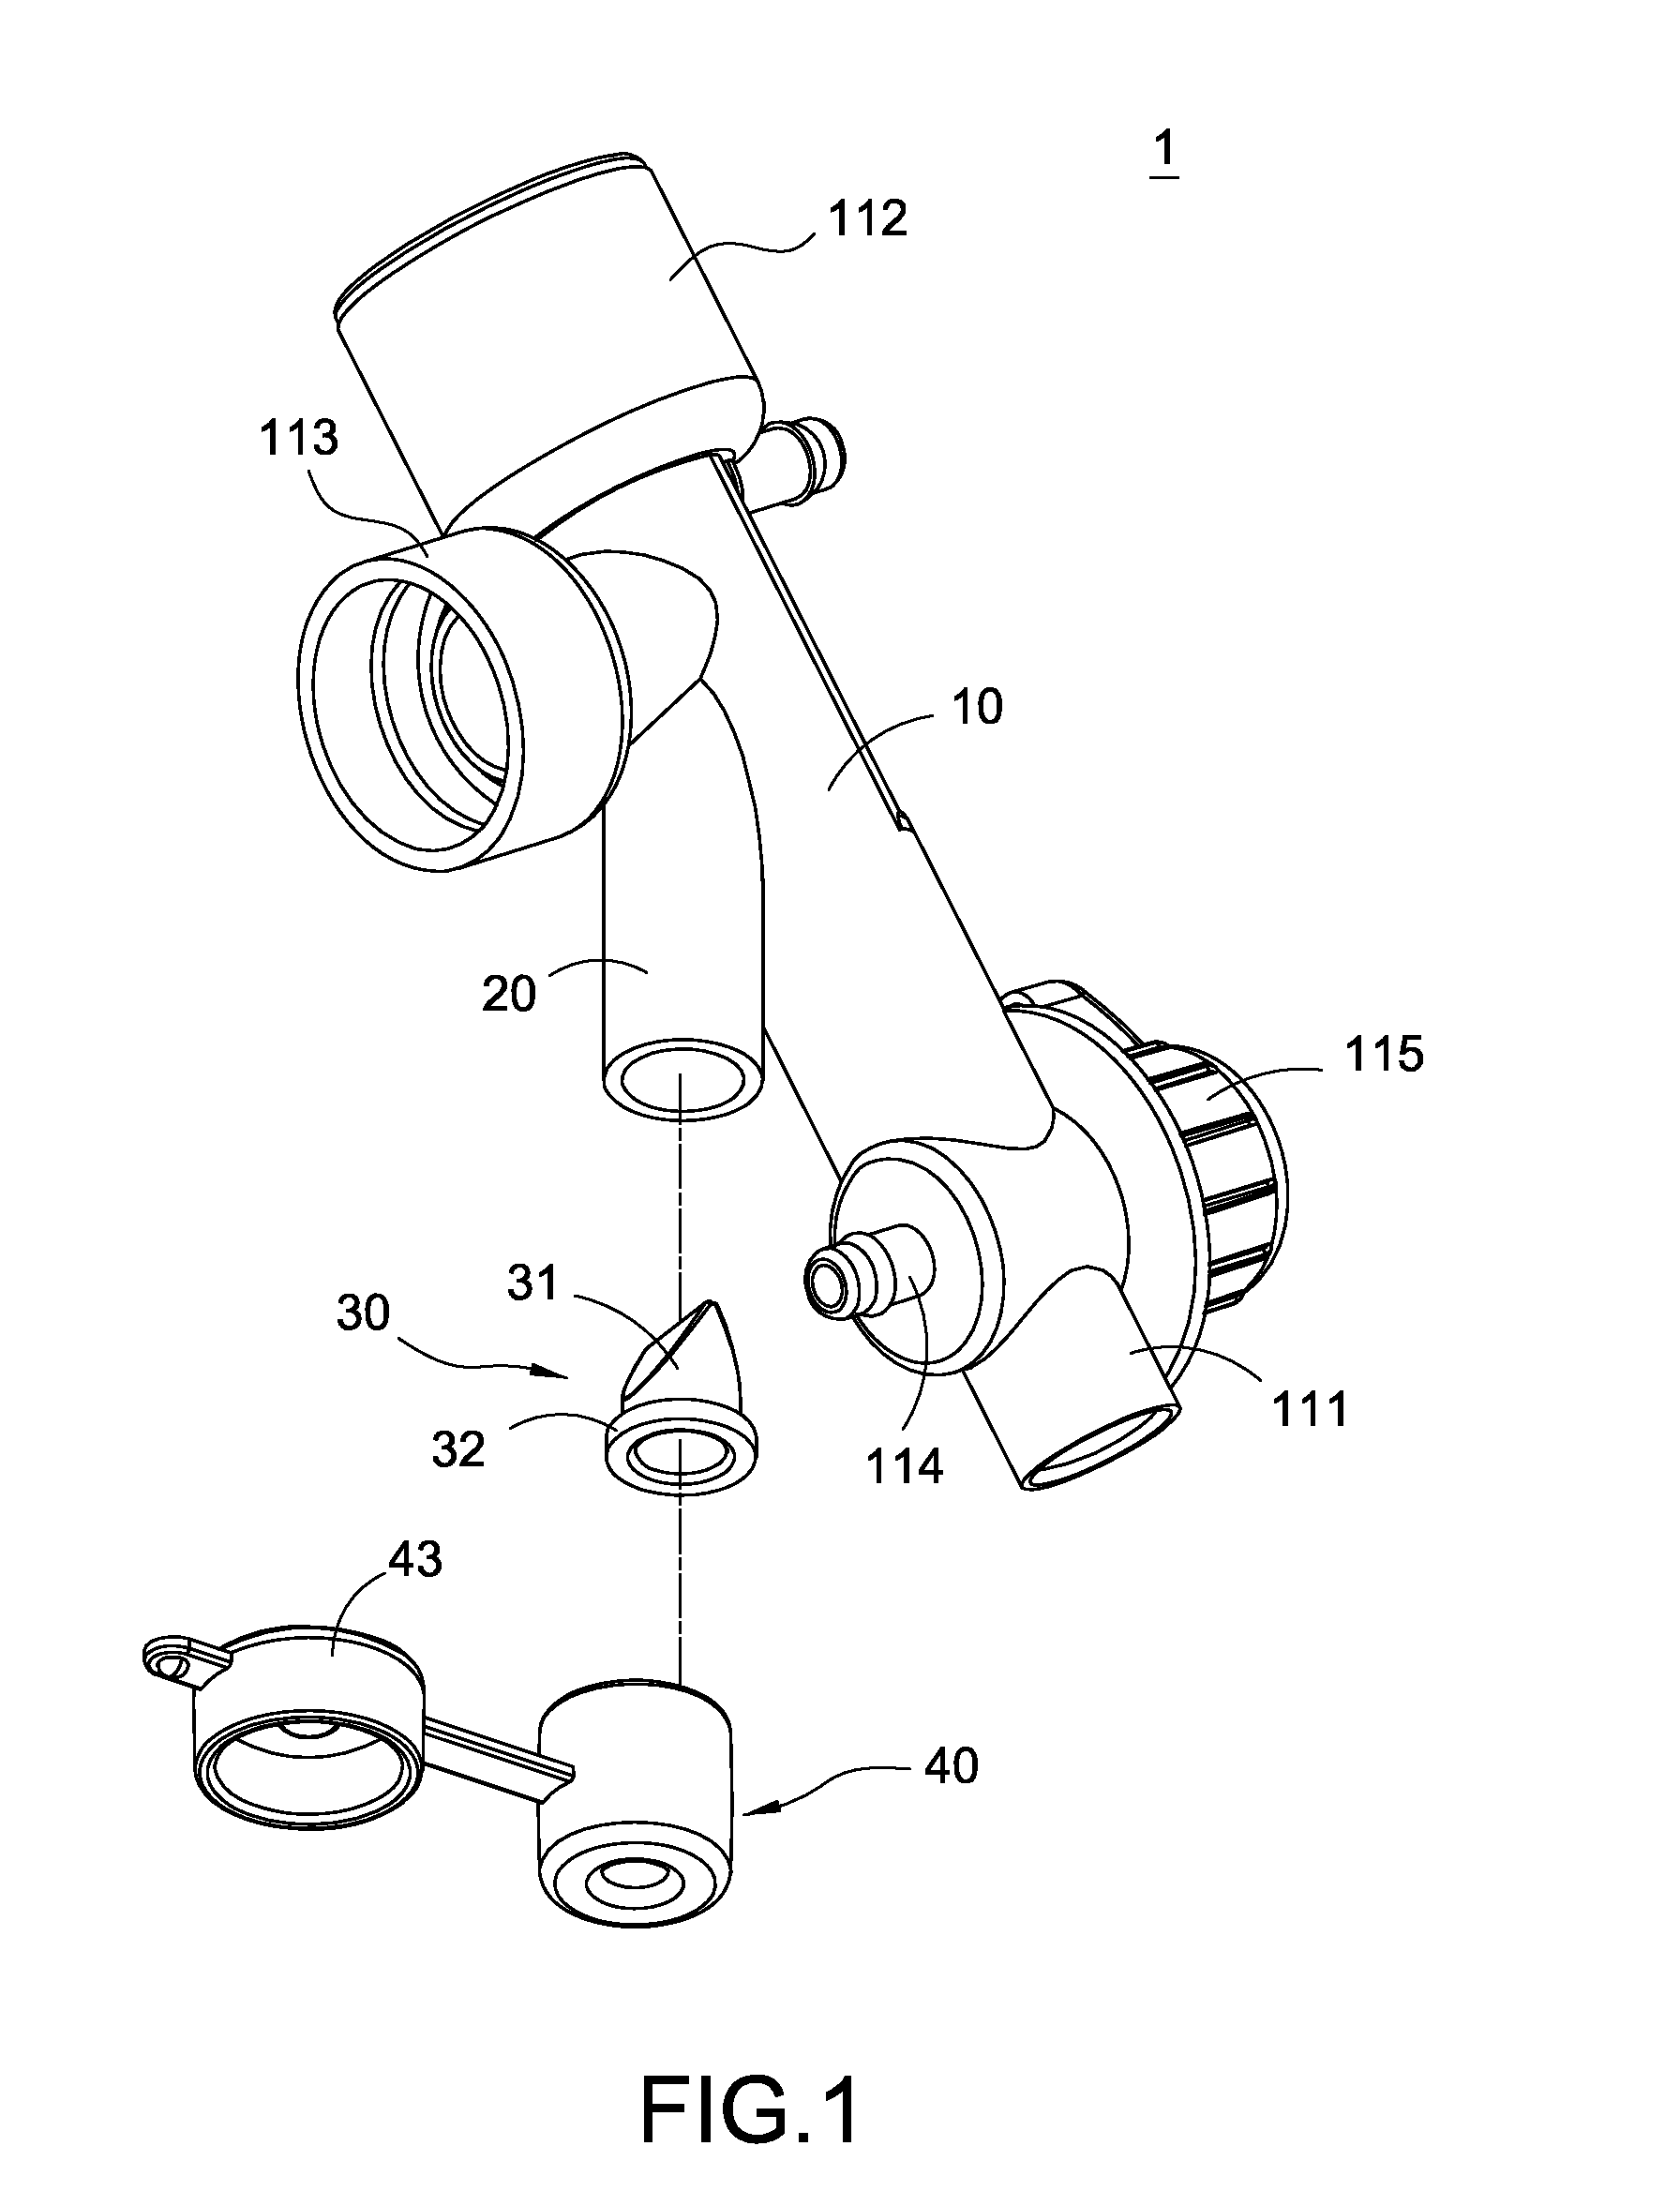 Closed suction set insertable with bronchoscope